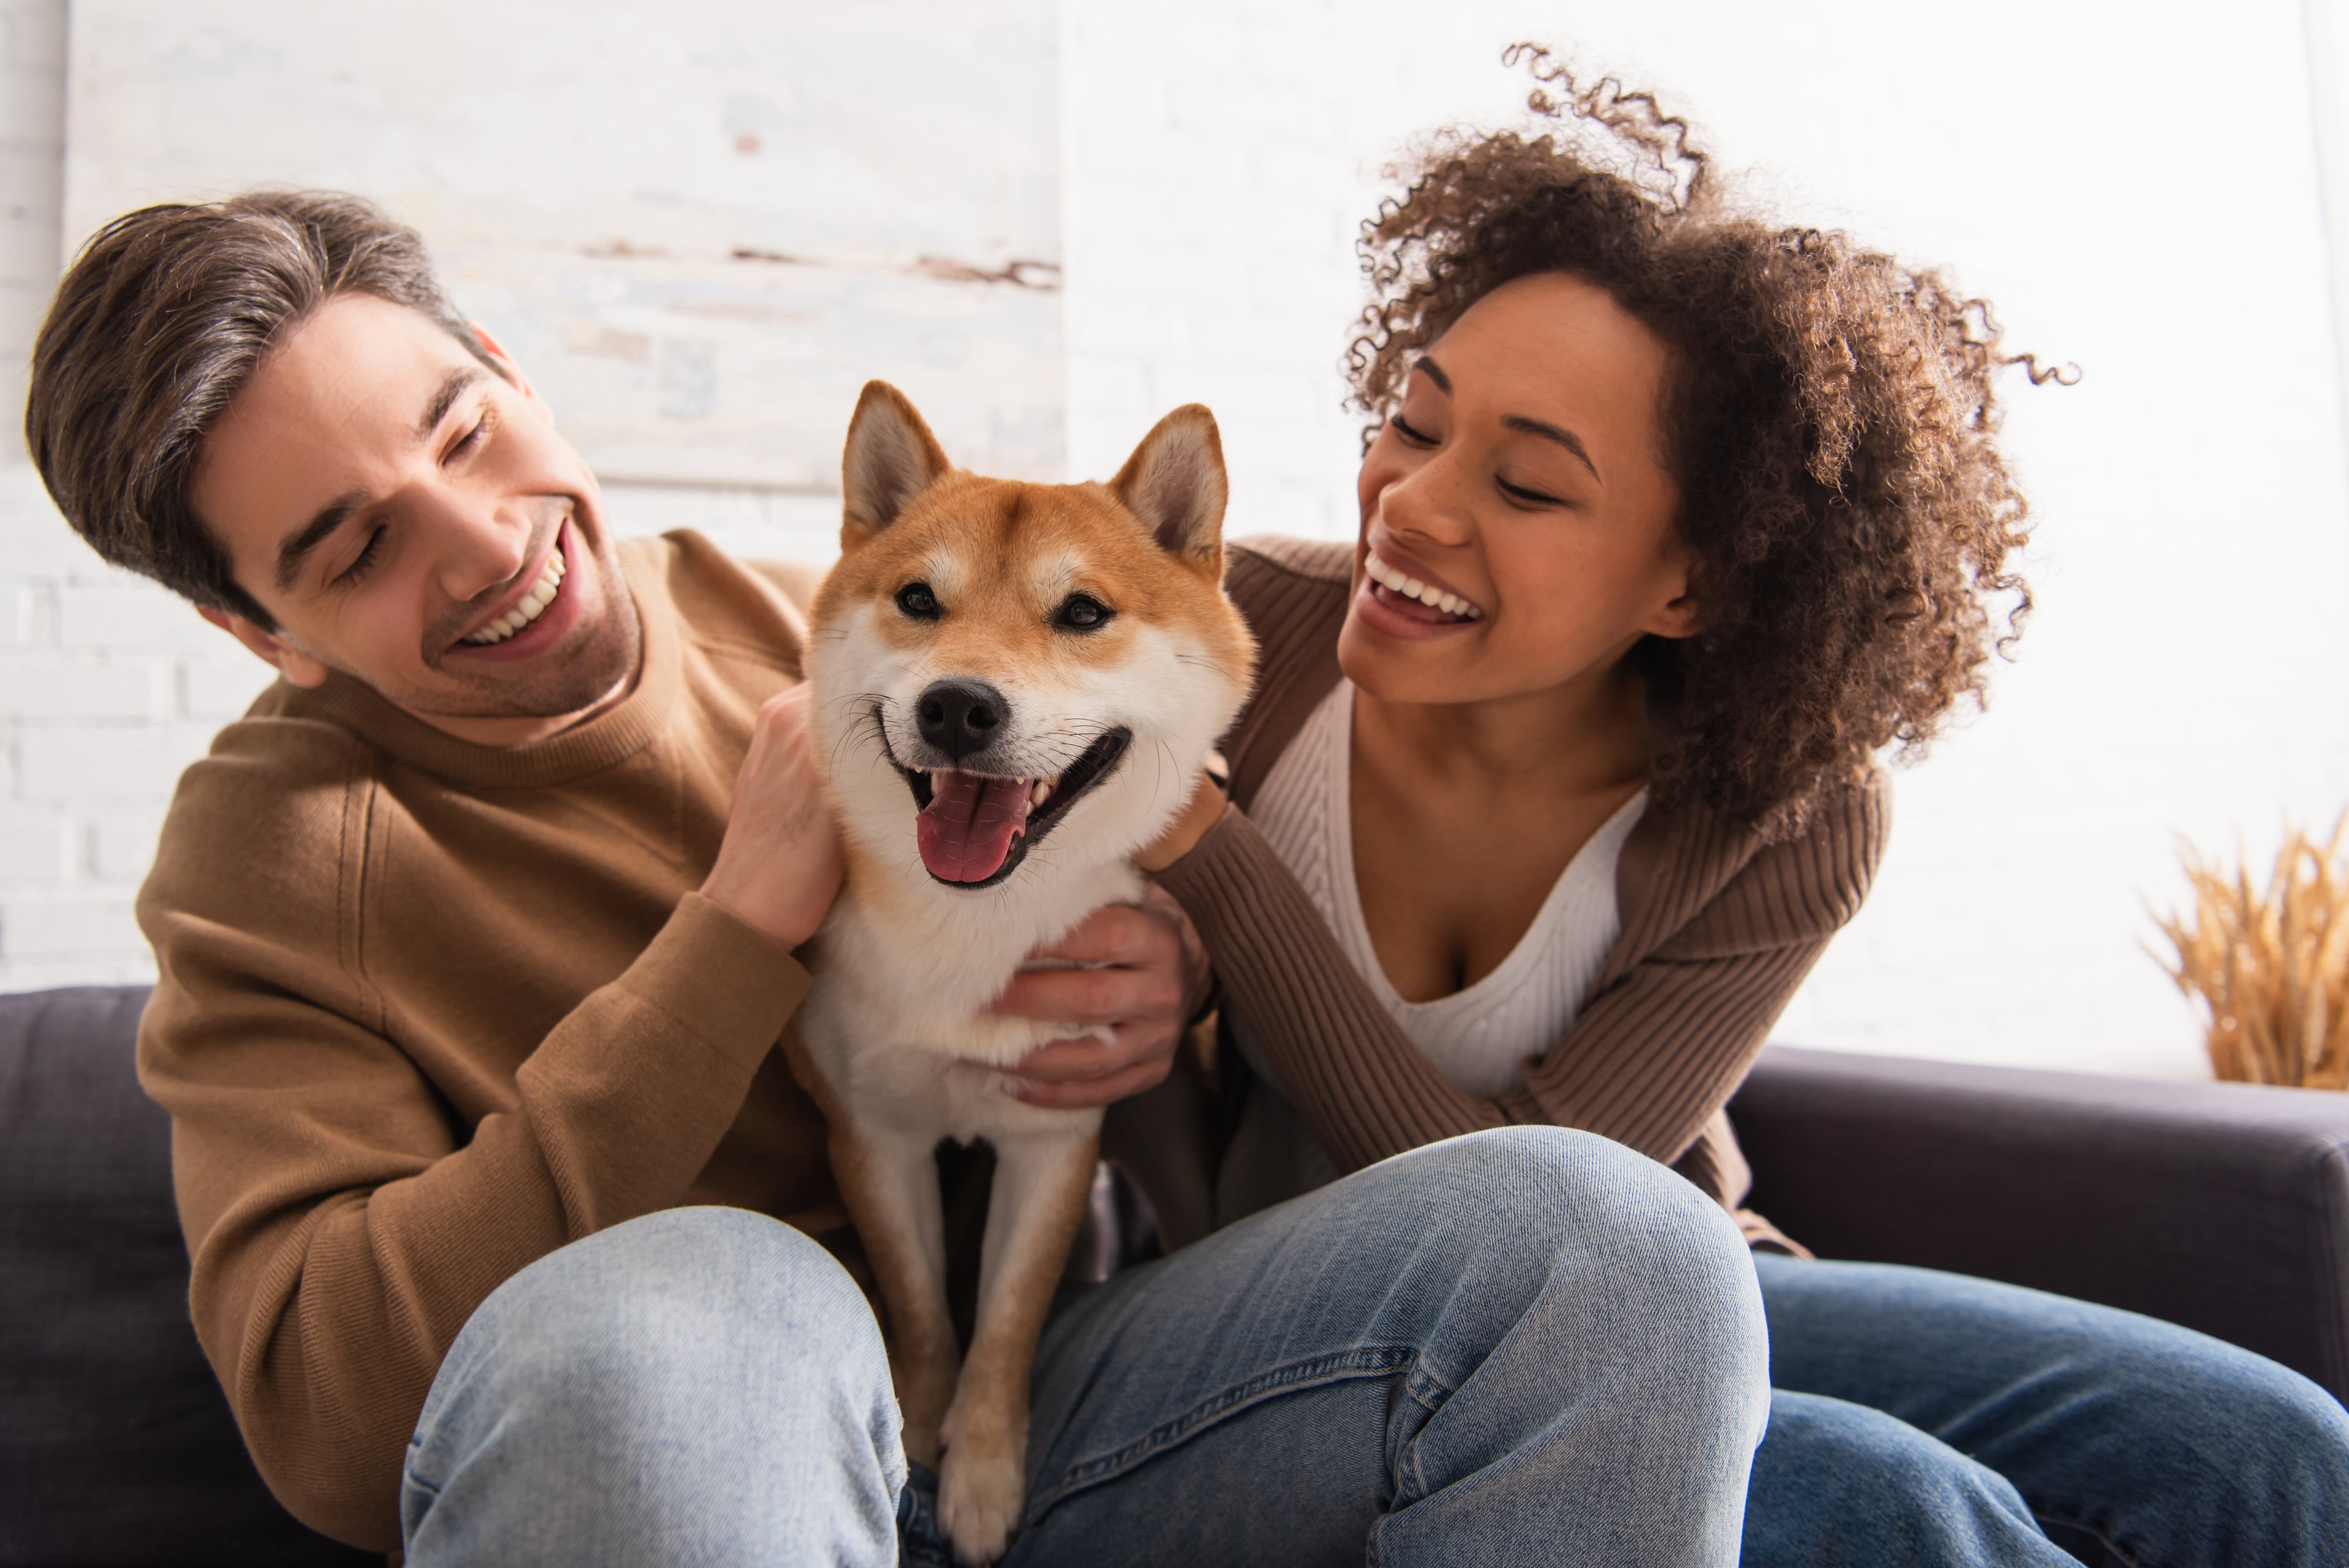 Man and woman smiling with pet dog in the middle